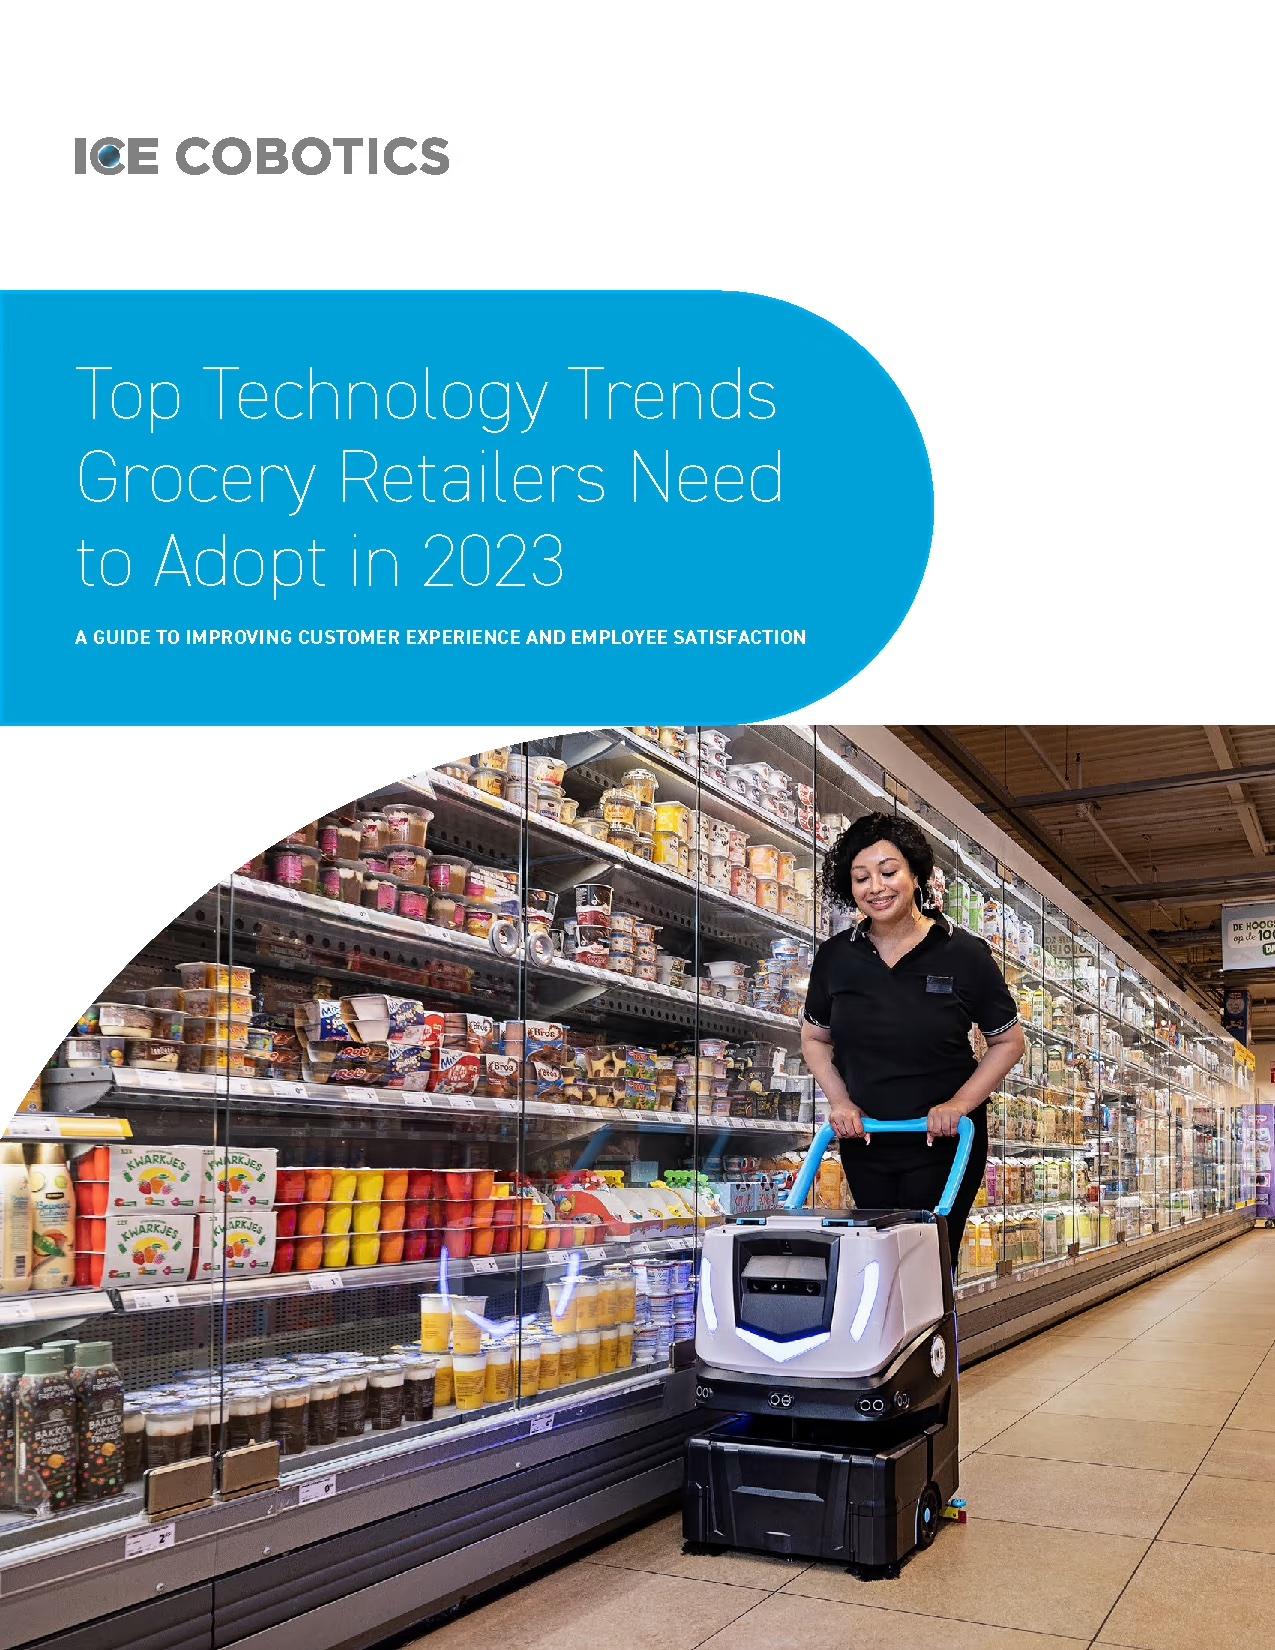 White Paper Top Technology Trends Grocery Retailers Need to Adopt in 2023 and Beyond: Image Shows Cobi 18, robotic floor scrubber, being used by retail worker in manual mode